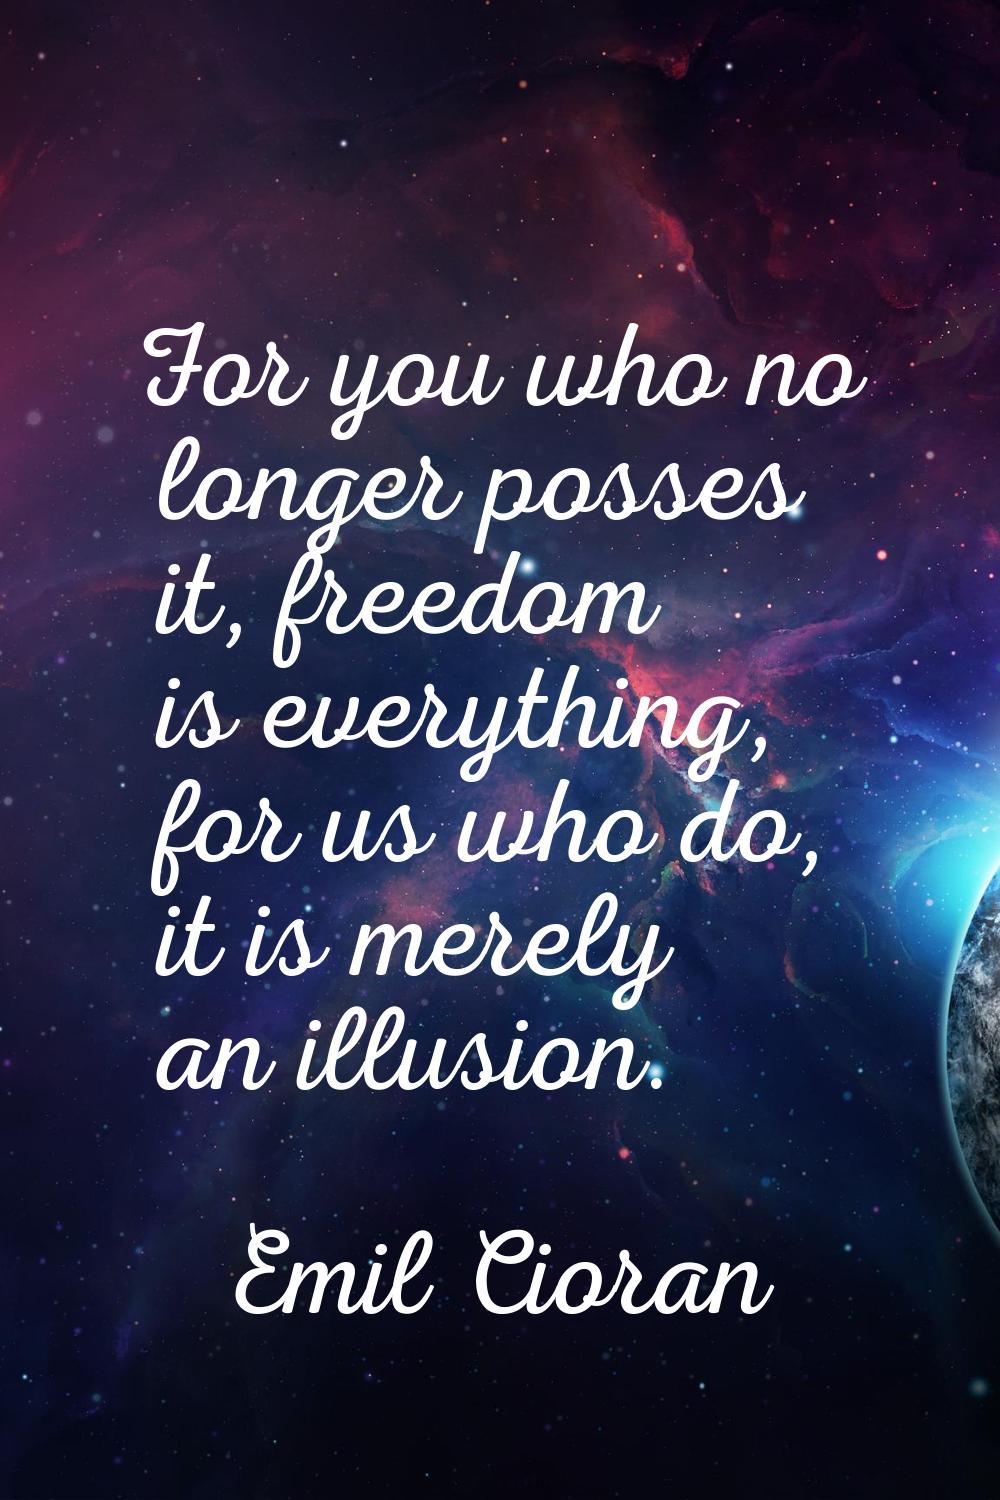 For you who no longer posses it, freedom is everything, for us who do, it is merely an illusion.